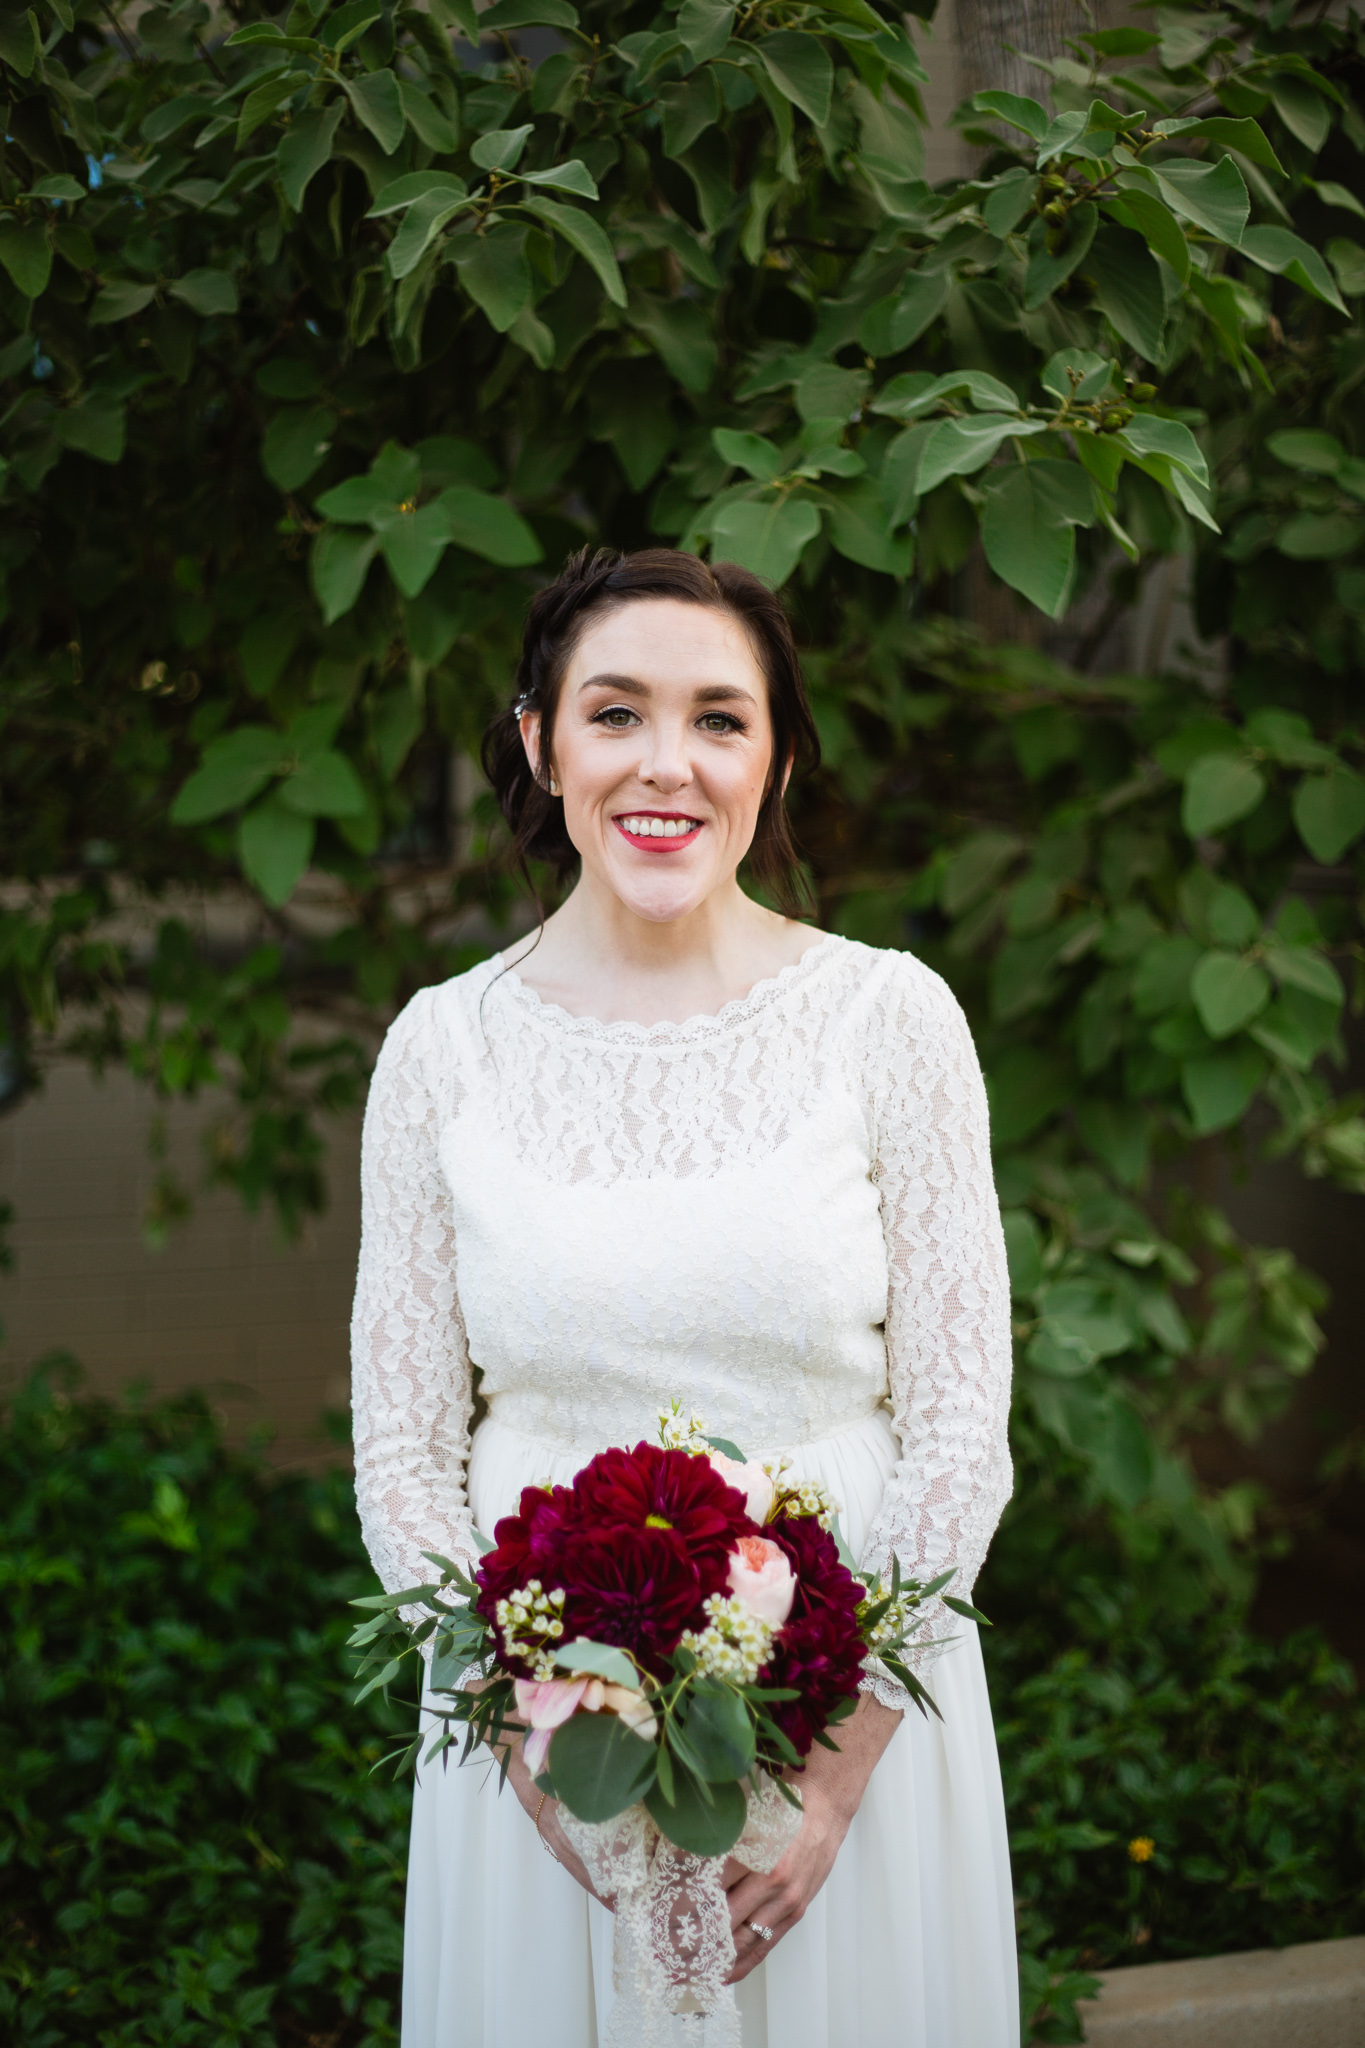 Classic vintage bride portrait in front of green plants with maroon and pink bouquet.